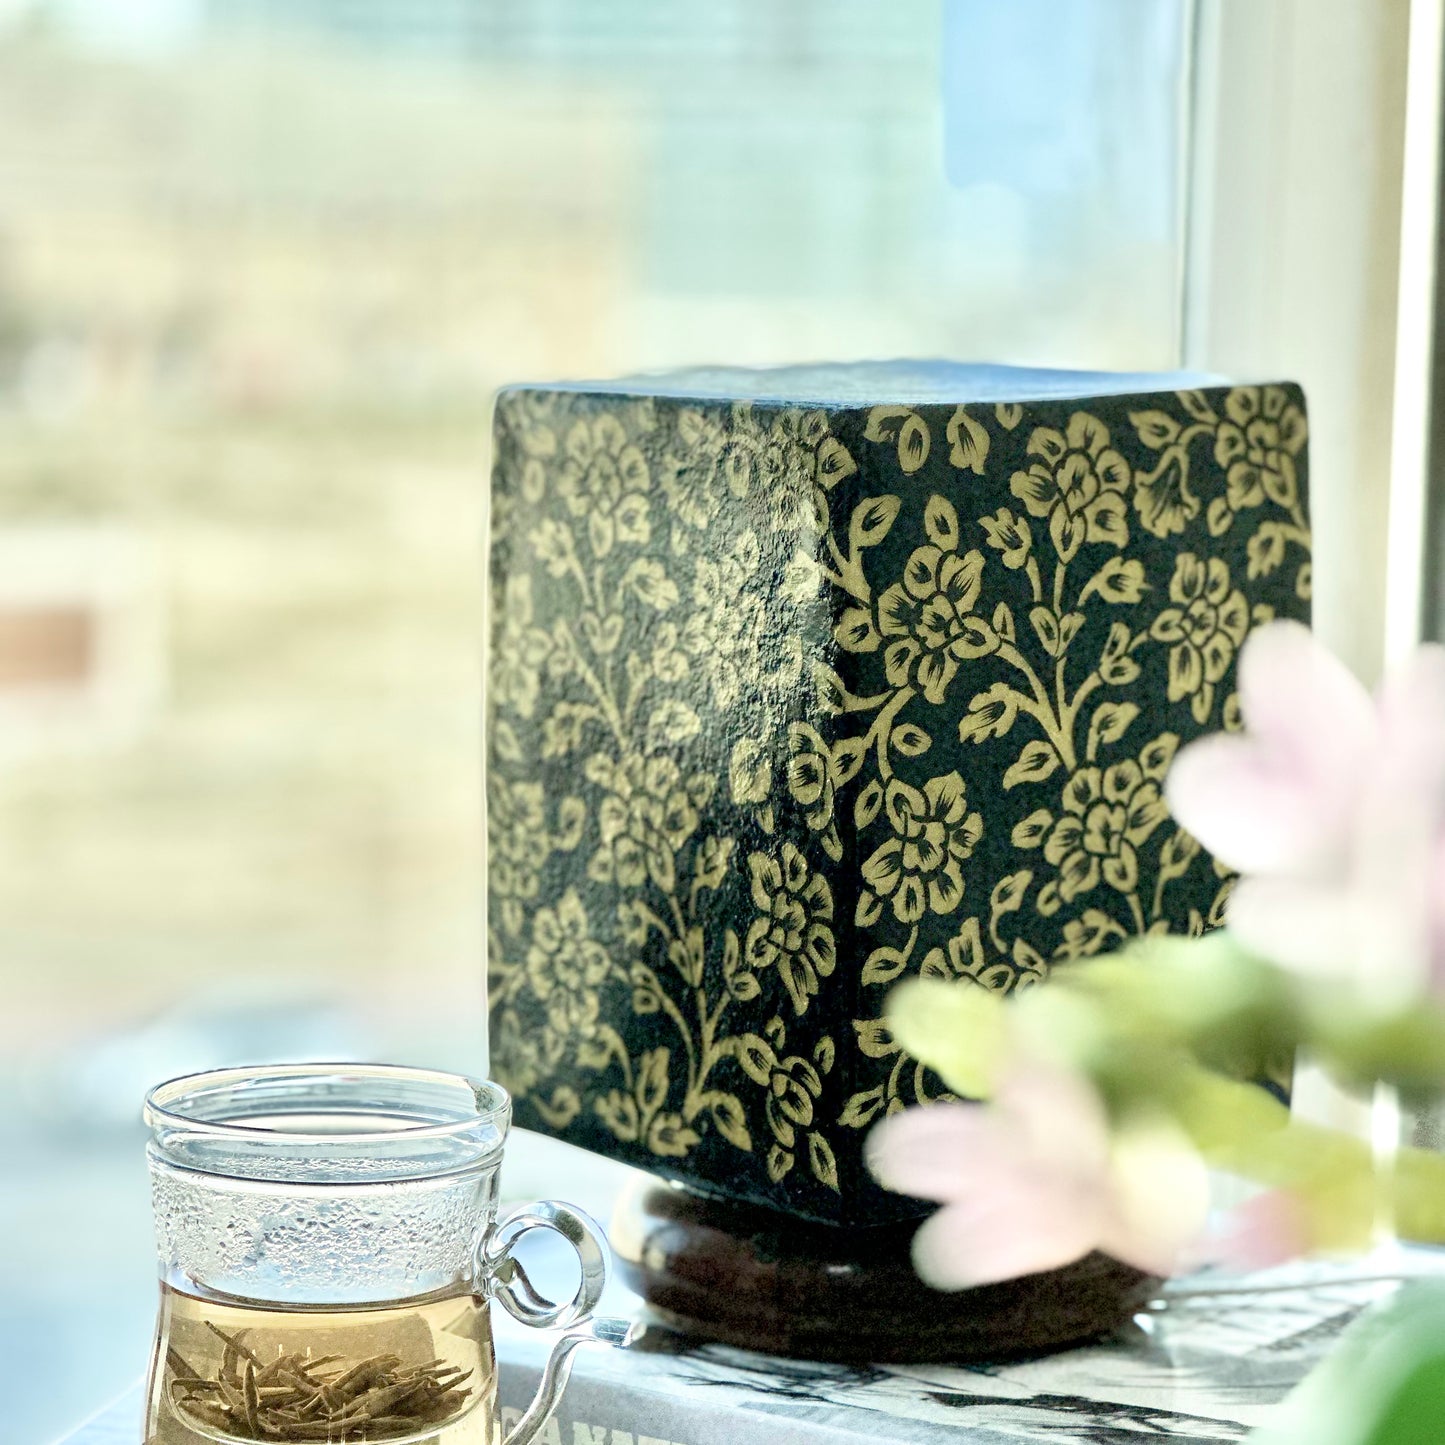 The Enchanted Black – Hand painted camel skin lamp